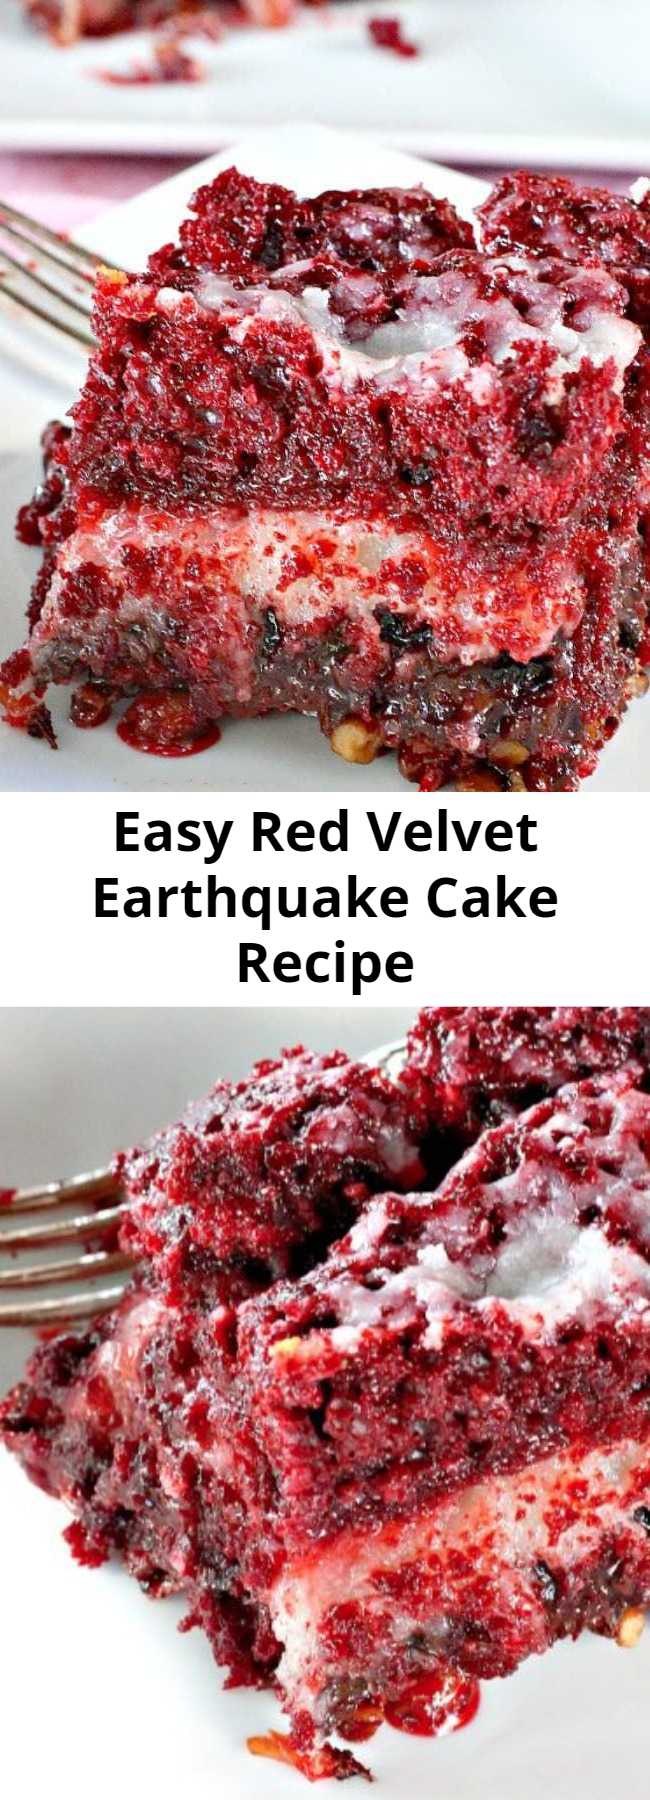 Easy Red Velvet Earthquake Cake Recipe - This delectable cake recipe calls for a Red Velvet cake batter and a cheesecake layer over top of pecans, coconut and chocolate chips. While baking the cake undergoes a seismic shift which explains its name. Fabulous for Christmas and Valentine's Day or other holiday baking.